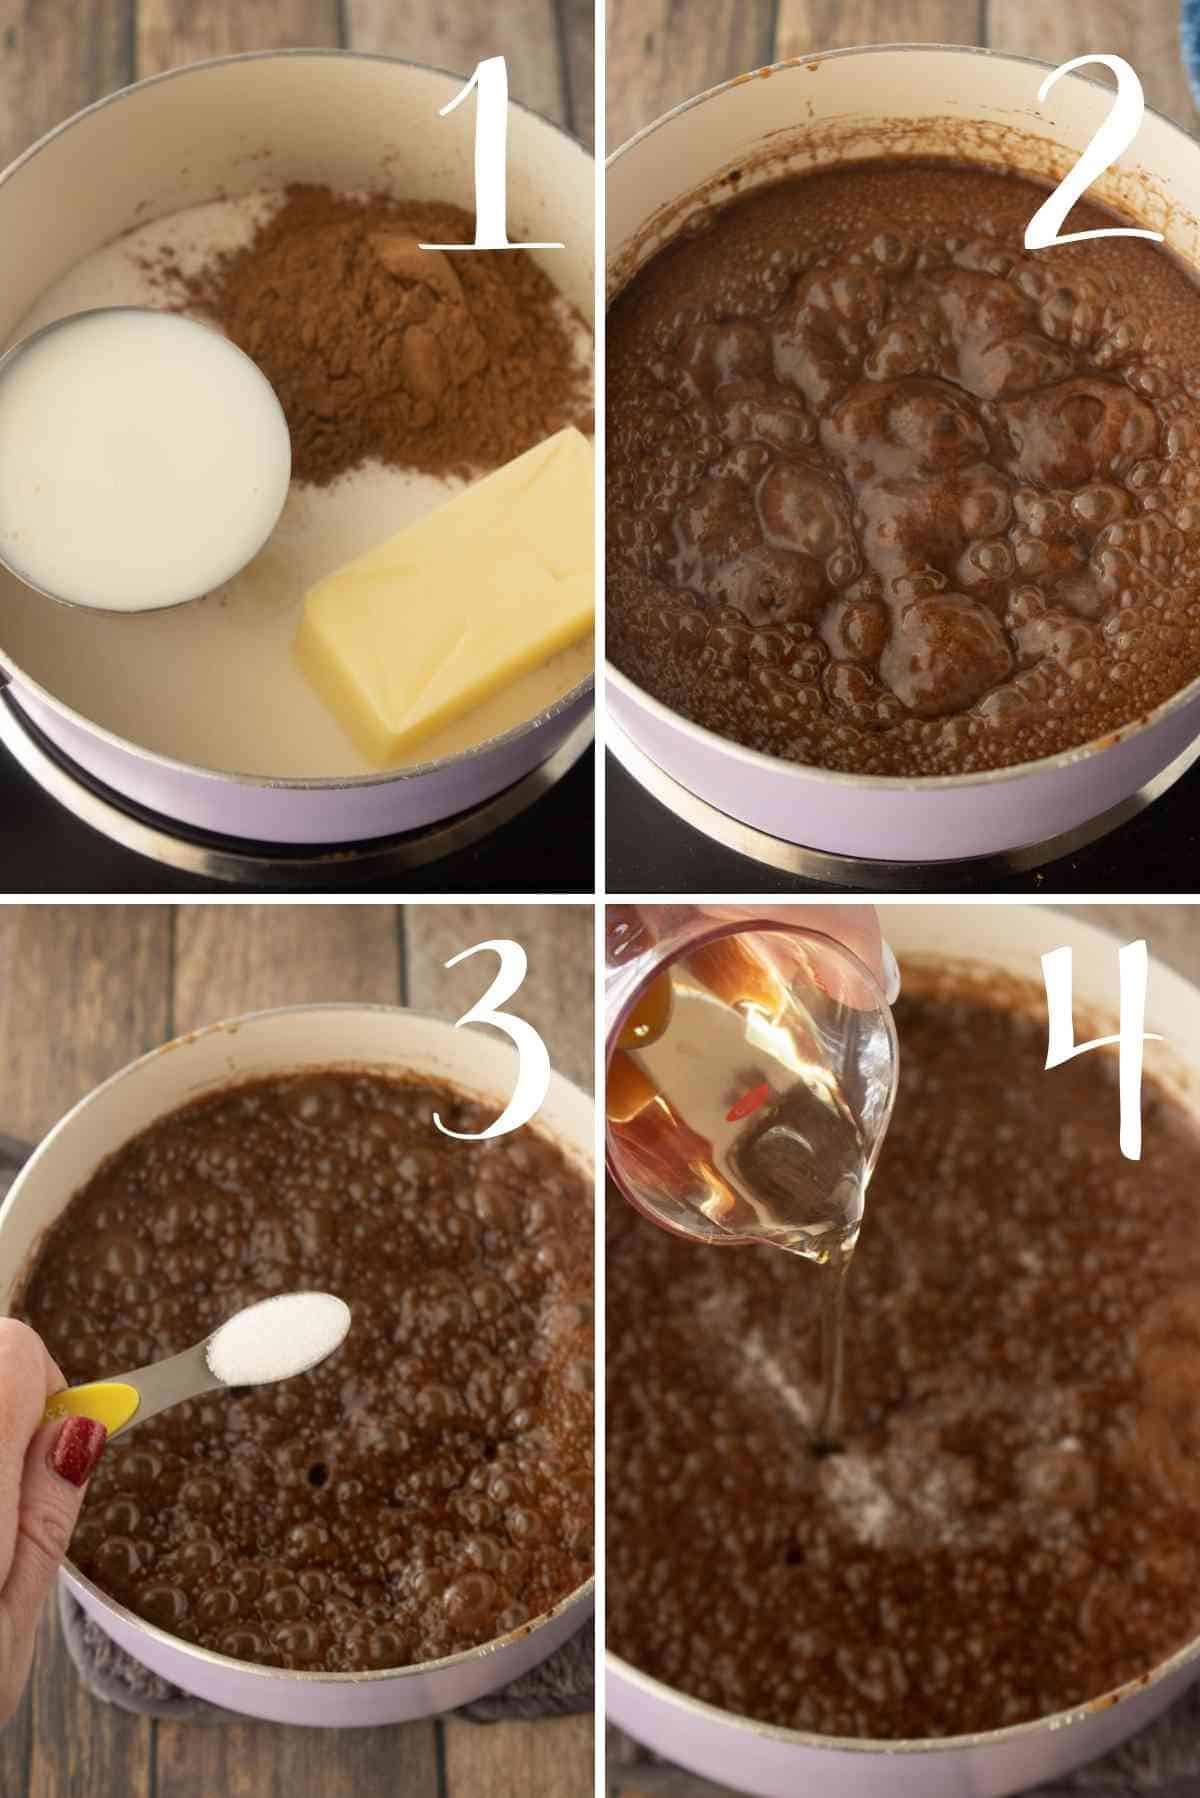 Bring sugar, milk, butter and cocoa to a boil.